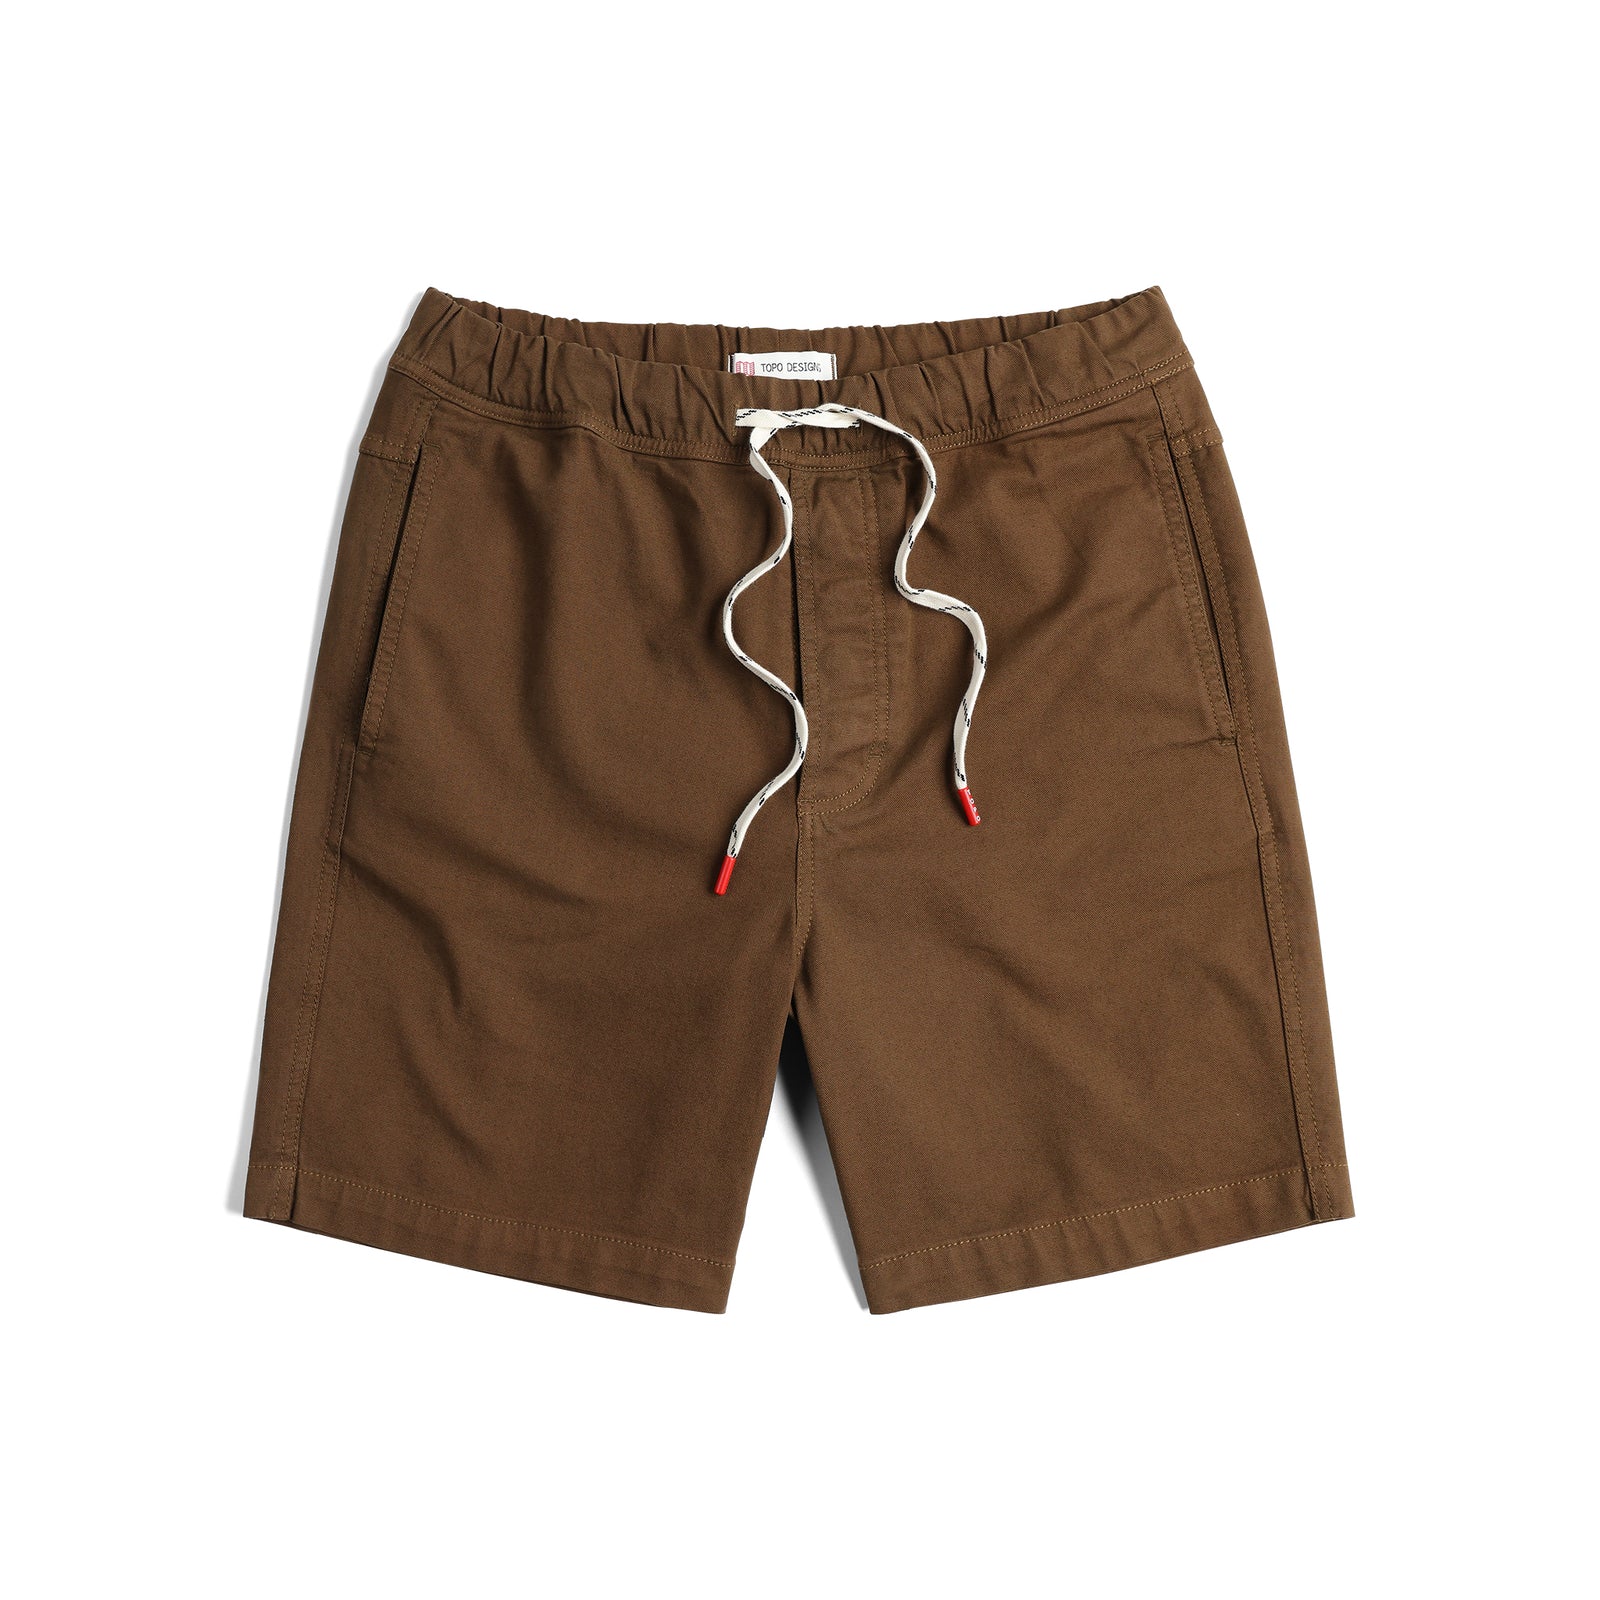 Front View of Topo Designs Dirt Shorts - Men's in "Desert Palm"